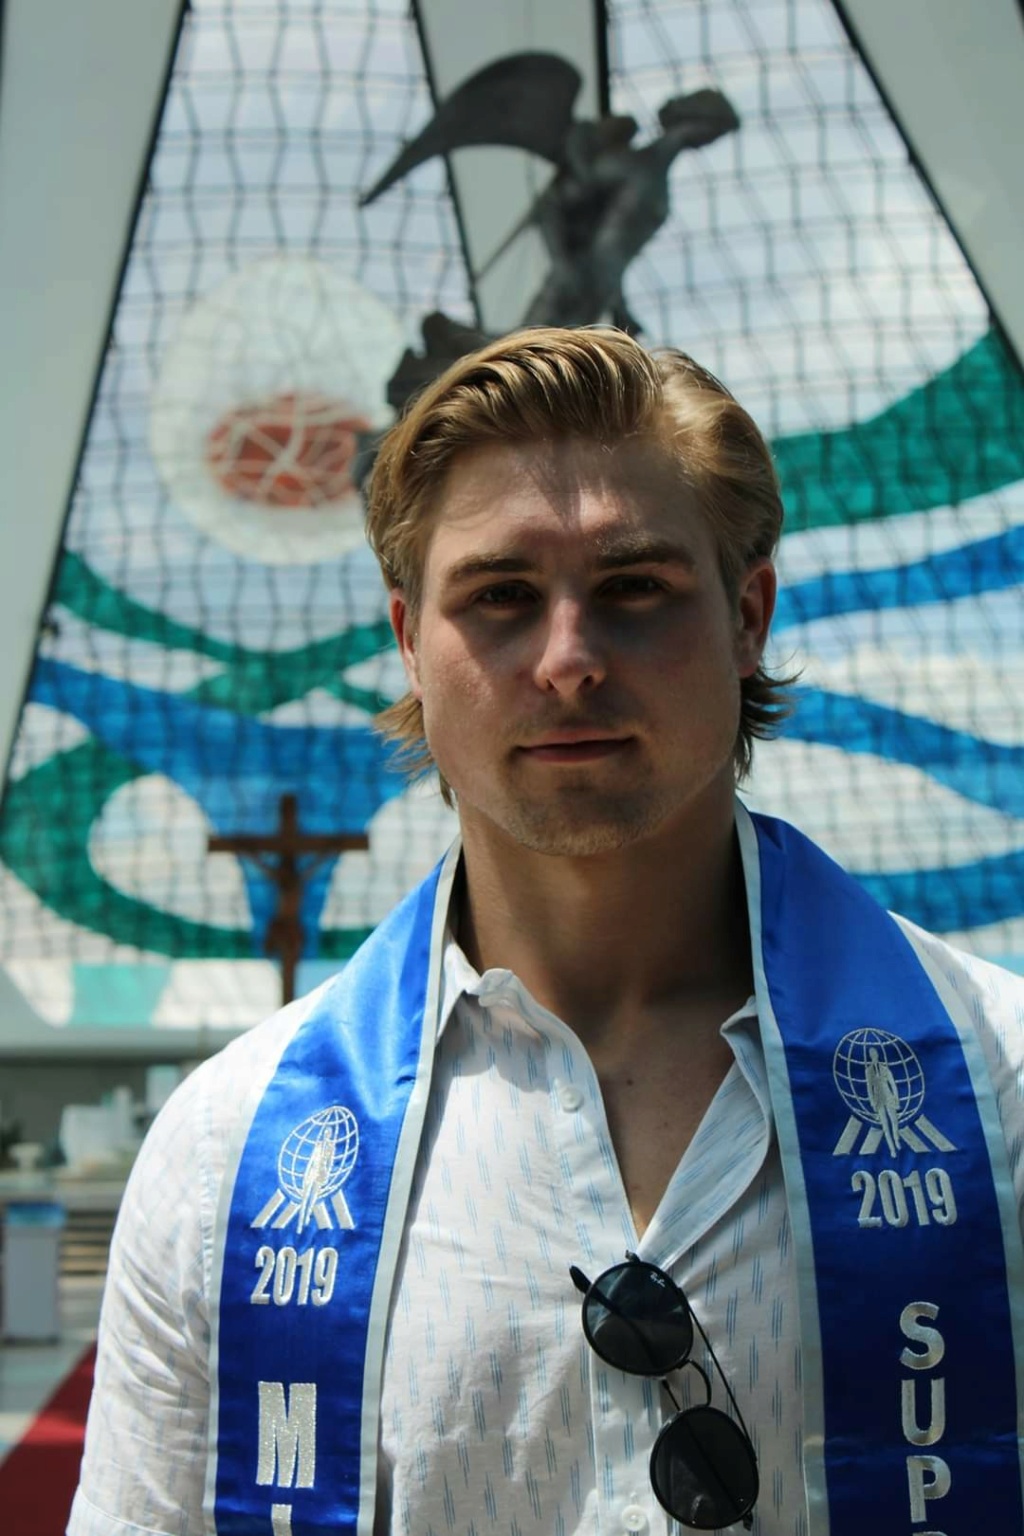 Official Thread of MISTER SUPRANATIONAL 2019: Nate Crnkovich from United States  - Page 2 Fb_i4442